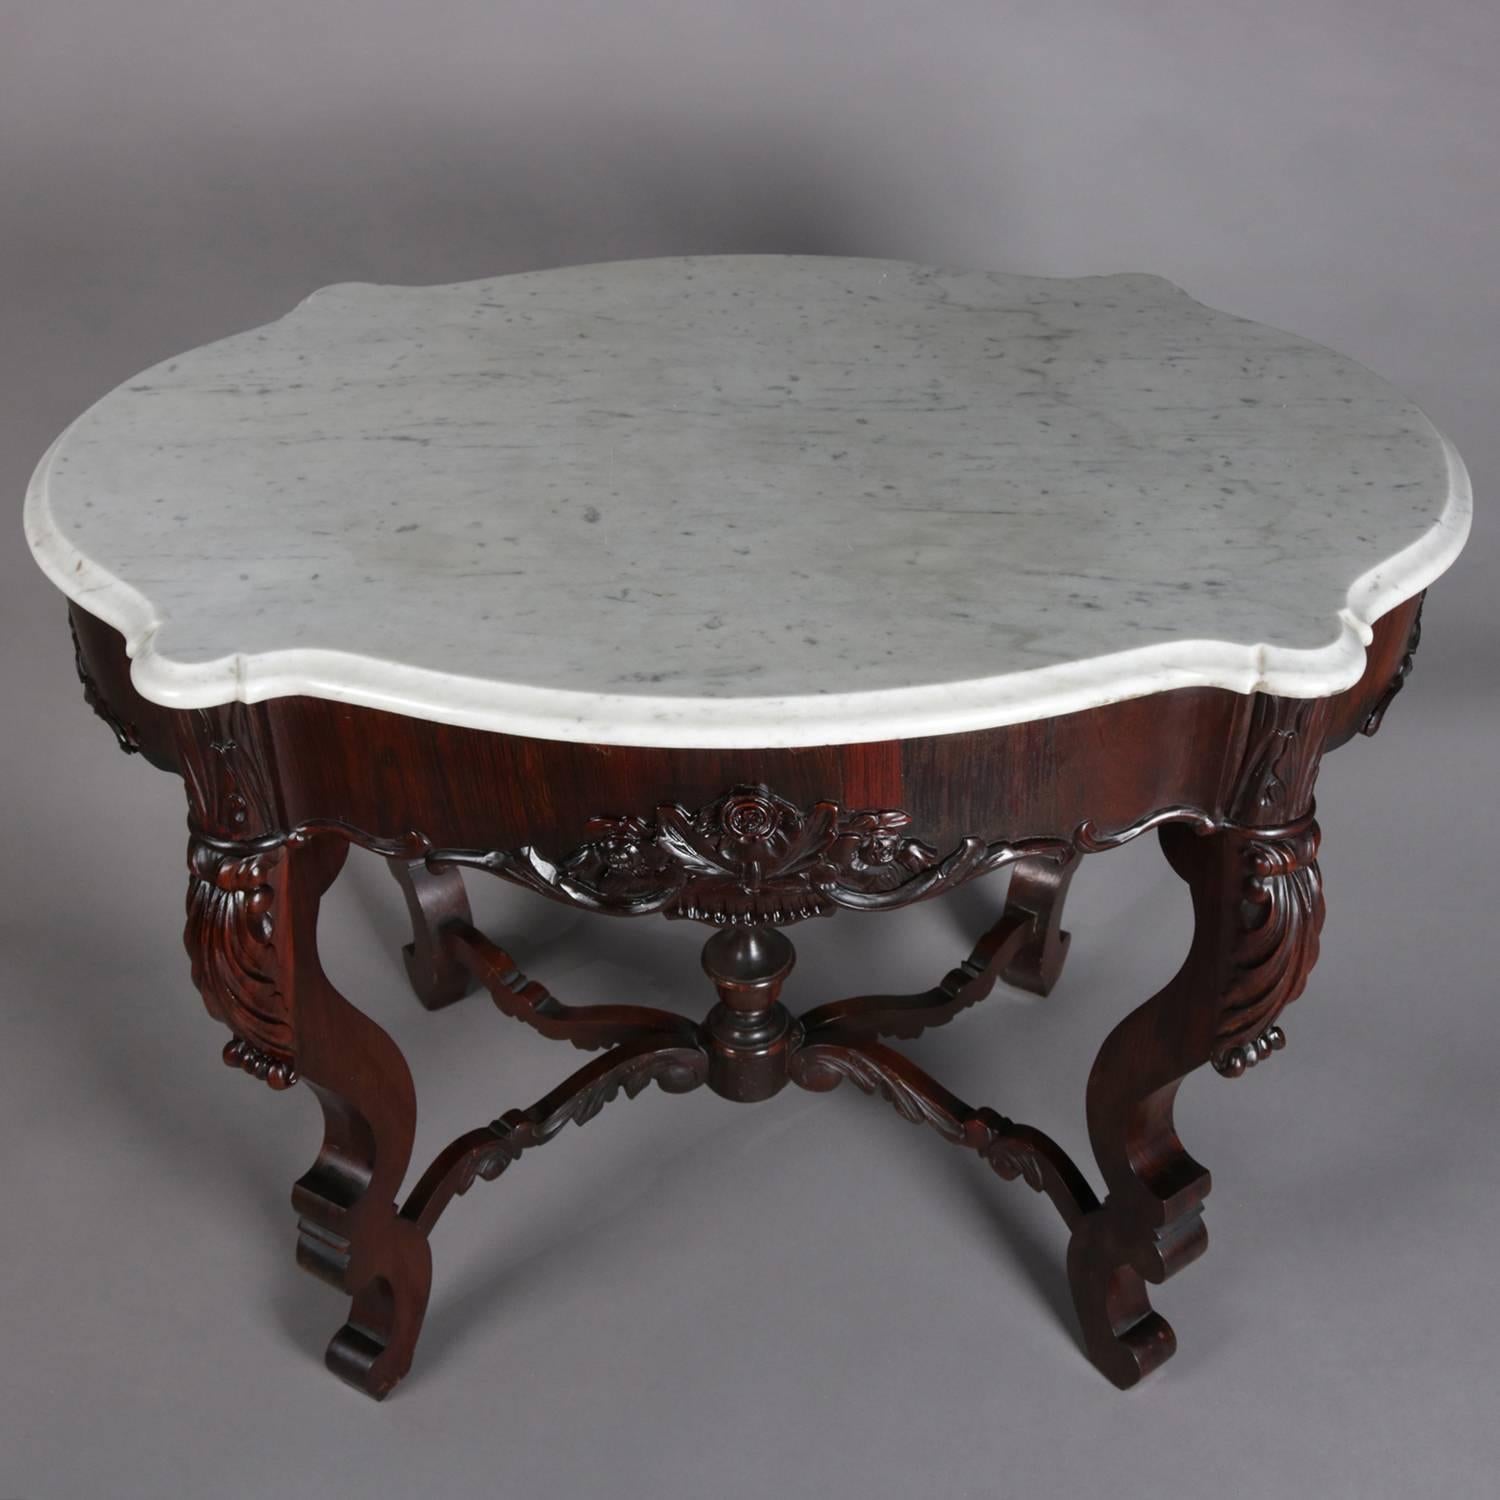 19th Century Antique Victorian Rococo Carved Rosewood and Marble Turtle Top Parlor Table